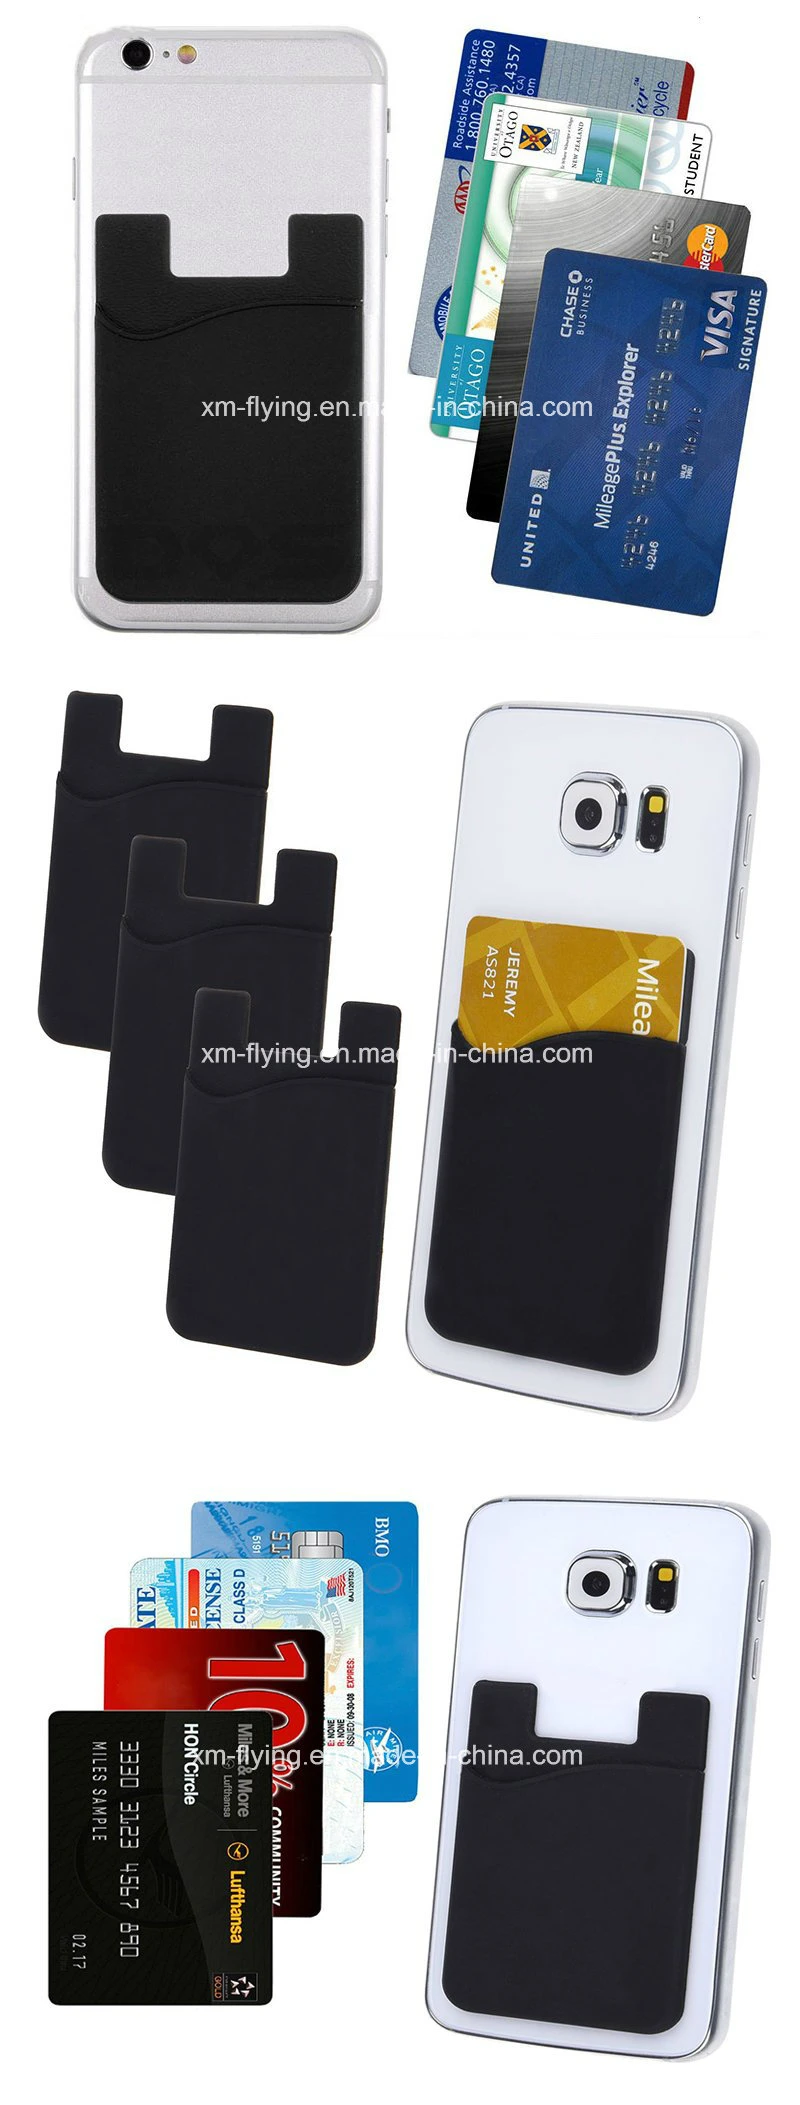 Universal 3m Adhesive Back Sticky Silicone Smart Cell-Phone Card Holders